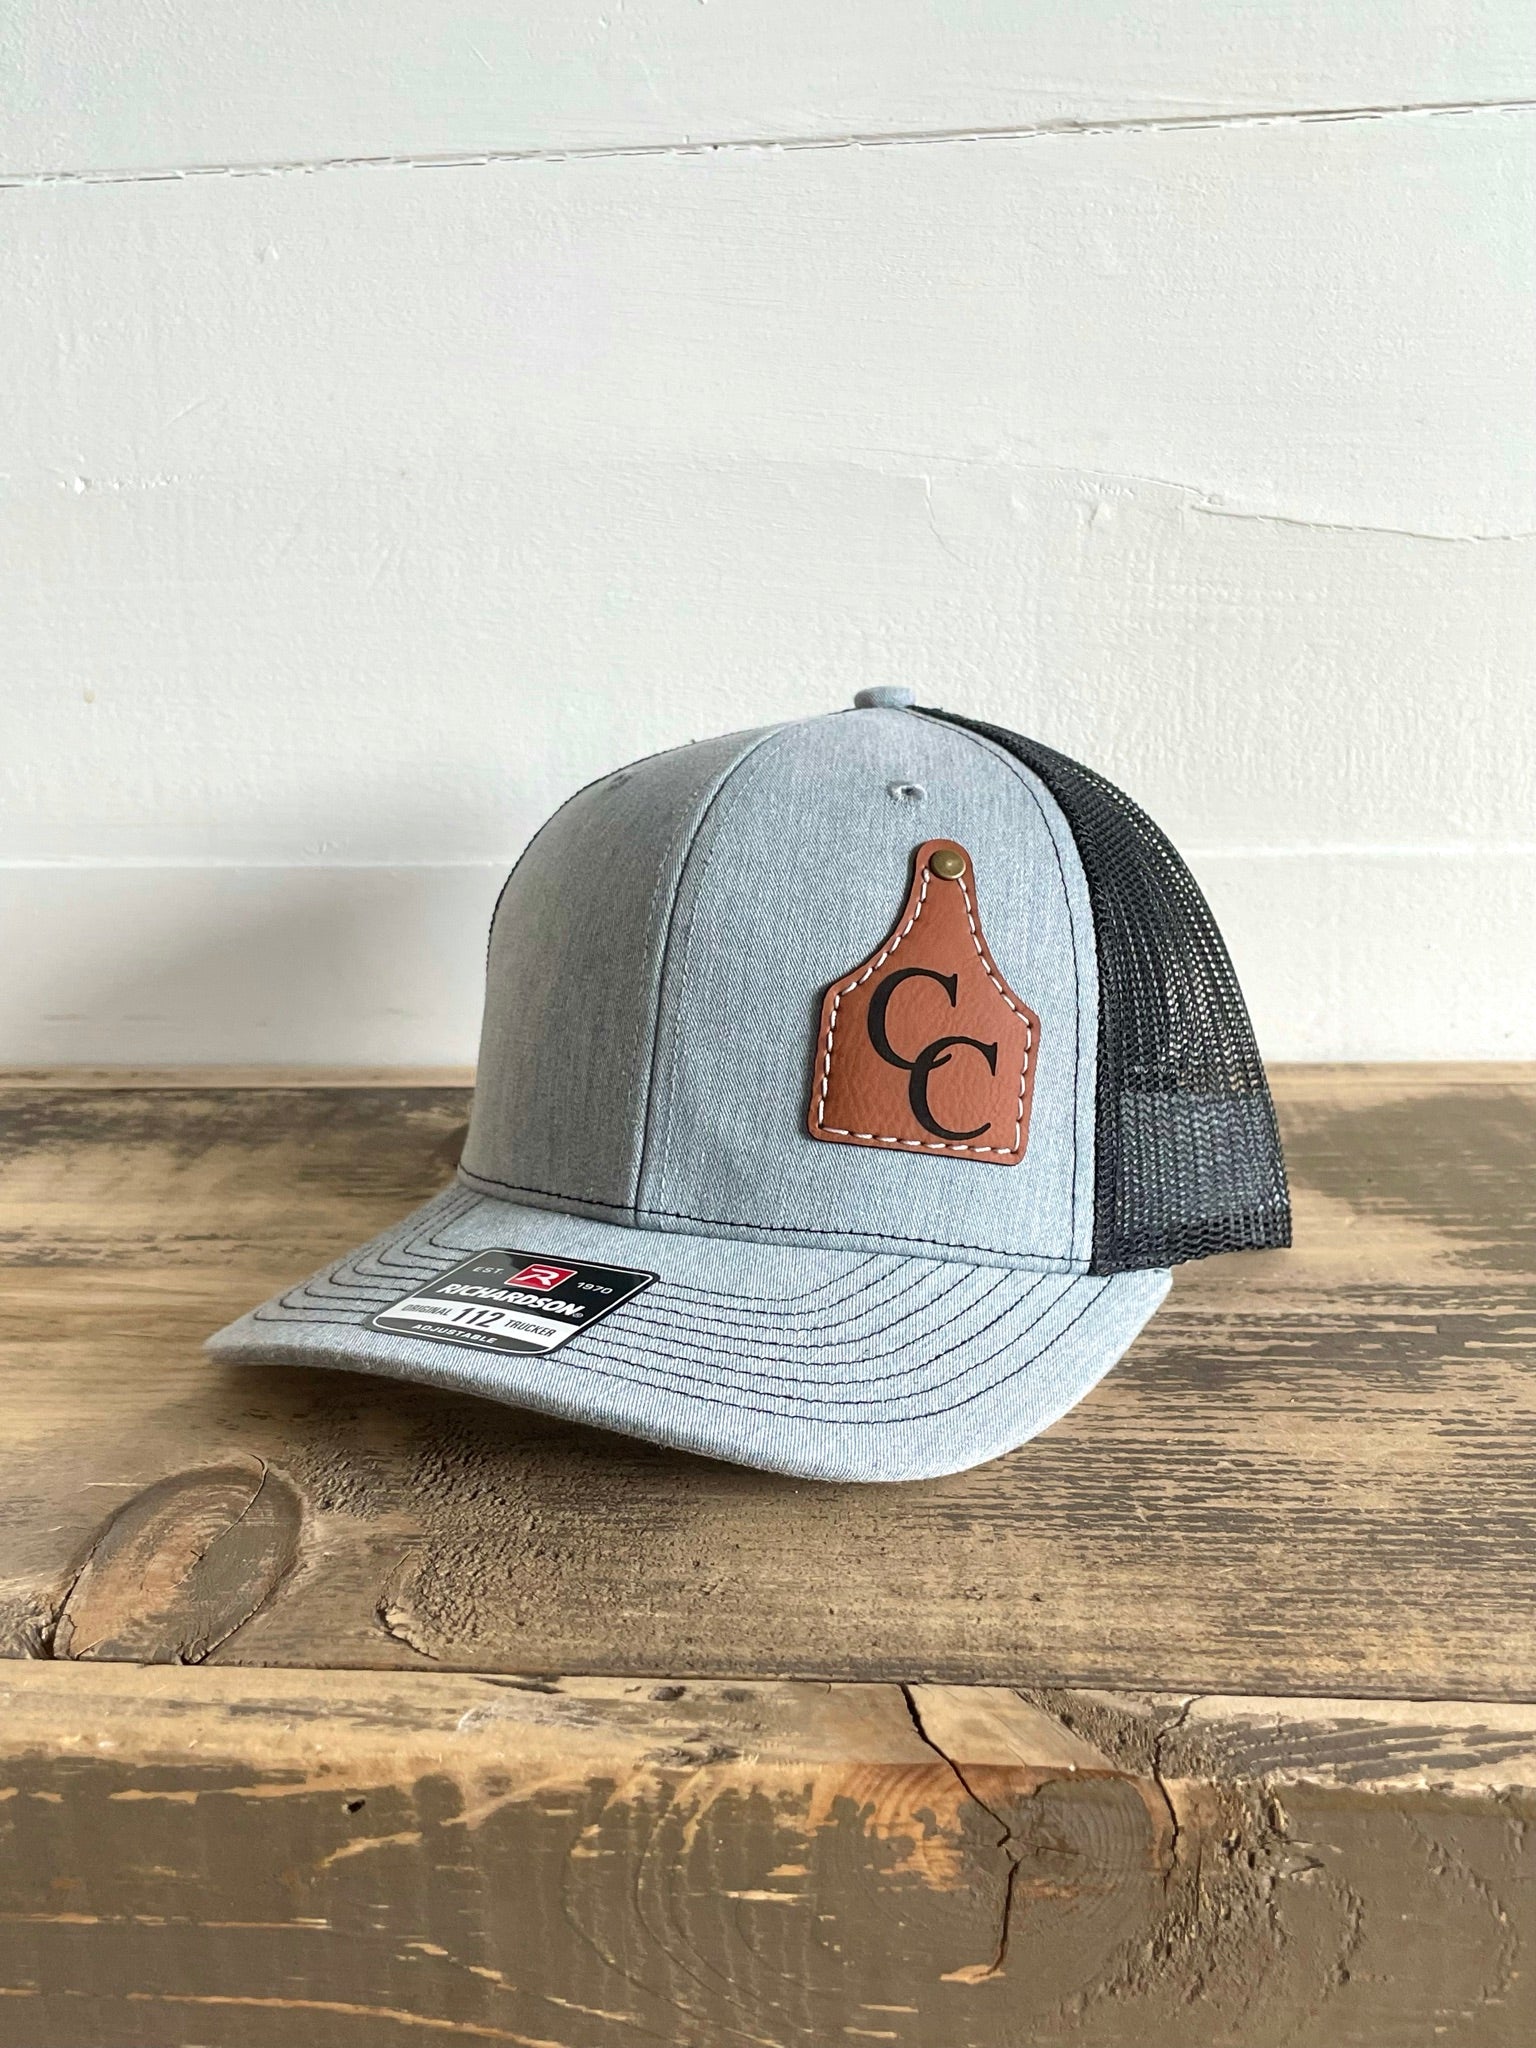 Custom Toddler Baseball Hats for baby, Personalized Leather Patch